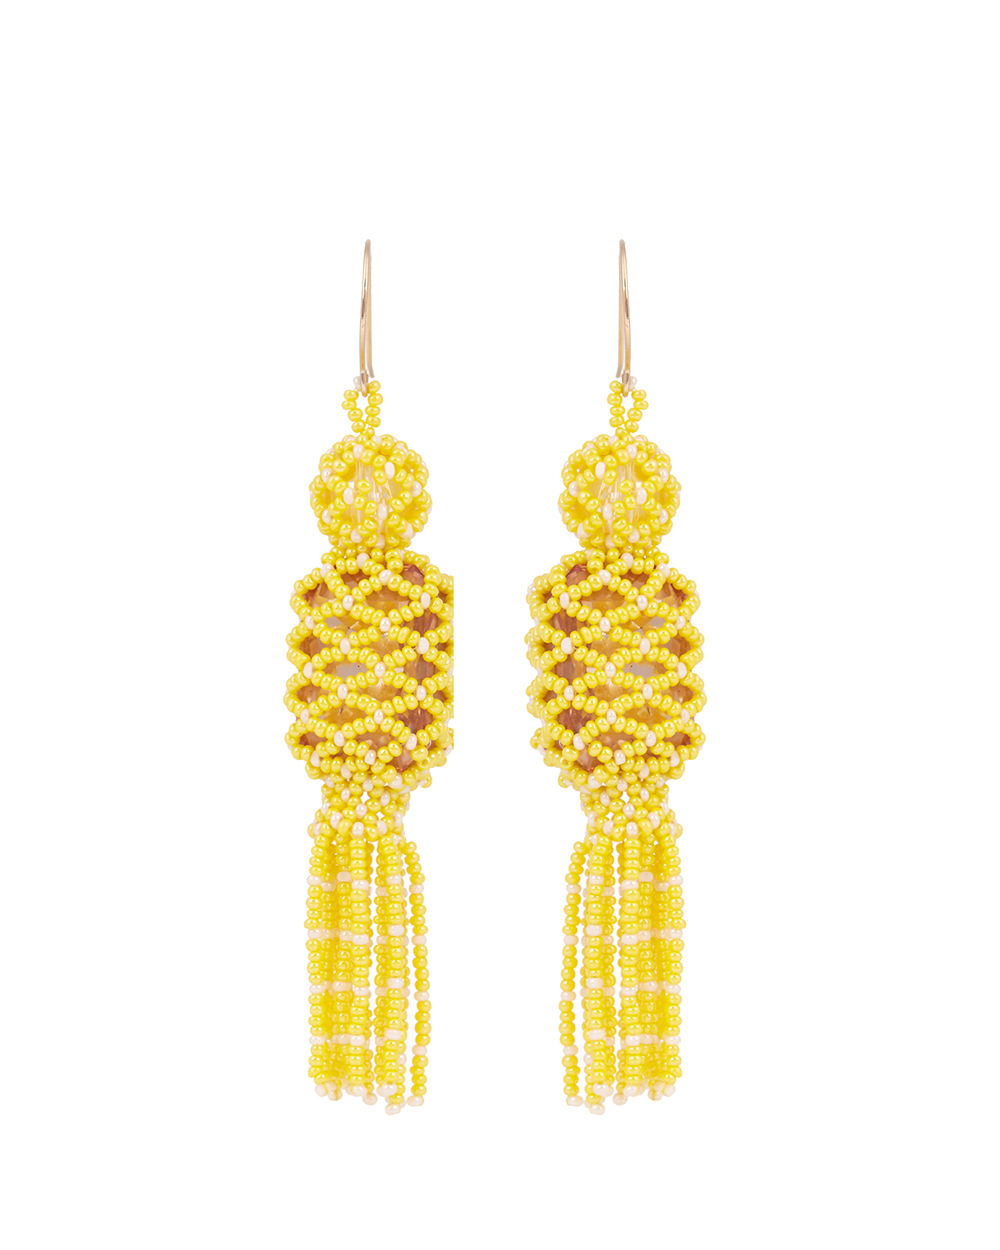 Etro earrings, $120, from Matches Fashion